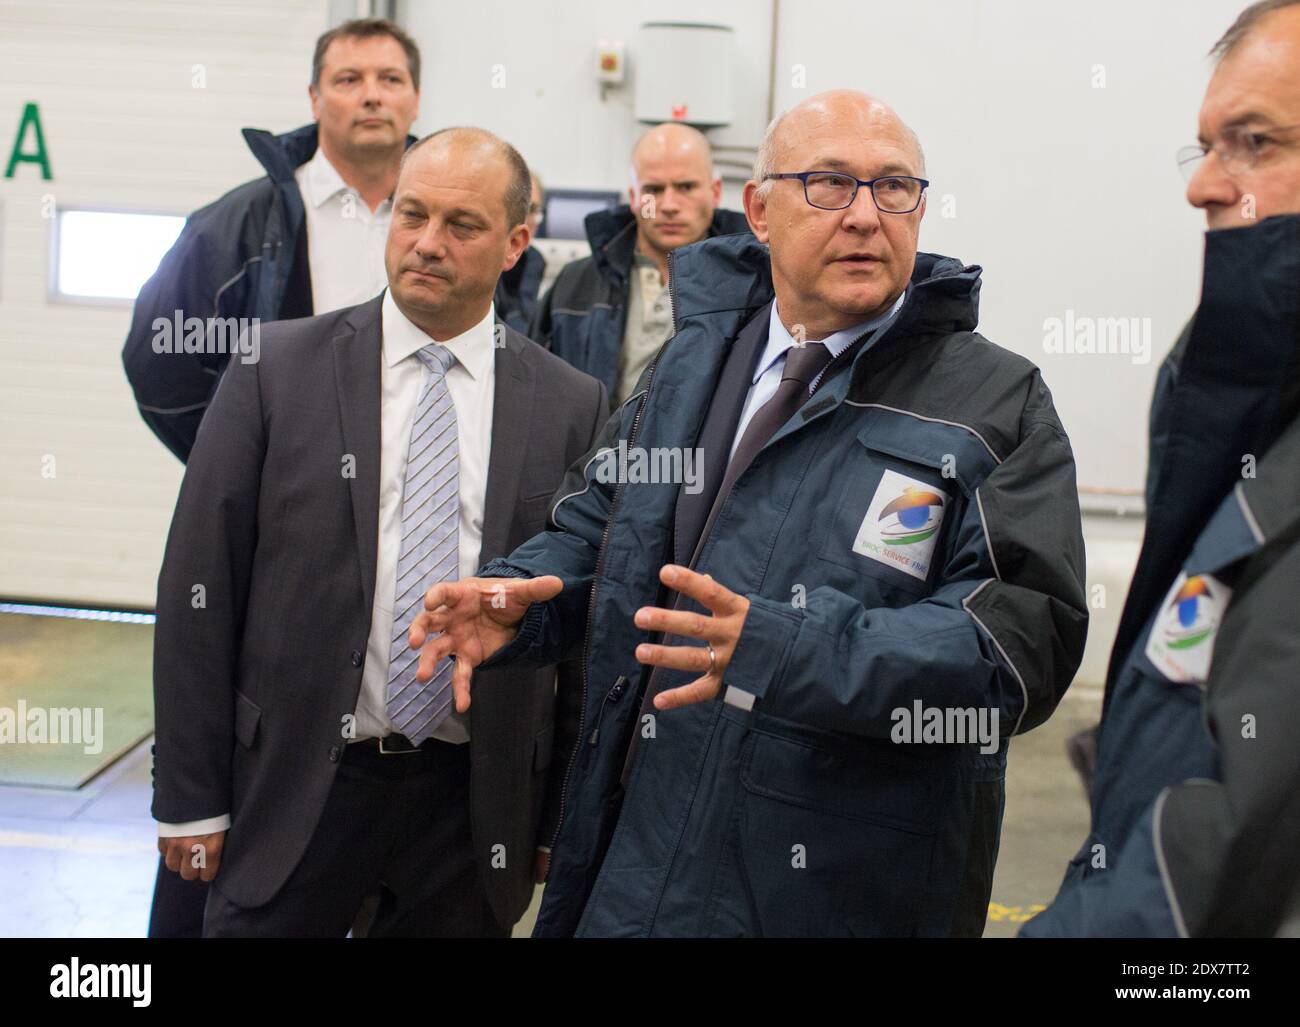 French Minister of Finance and public Accounts Michel Sapin visits the company Broc Service Frais in Feyzin, near Lyon, September 5, 2014, to meet the economy actors and approach CICE (Credit Impot Creativite et Emploi) and the implementation of the pact of responsibility. Photo by Vincent Dargent/ABACAPRESS.COM Stock Photo